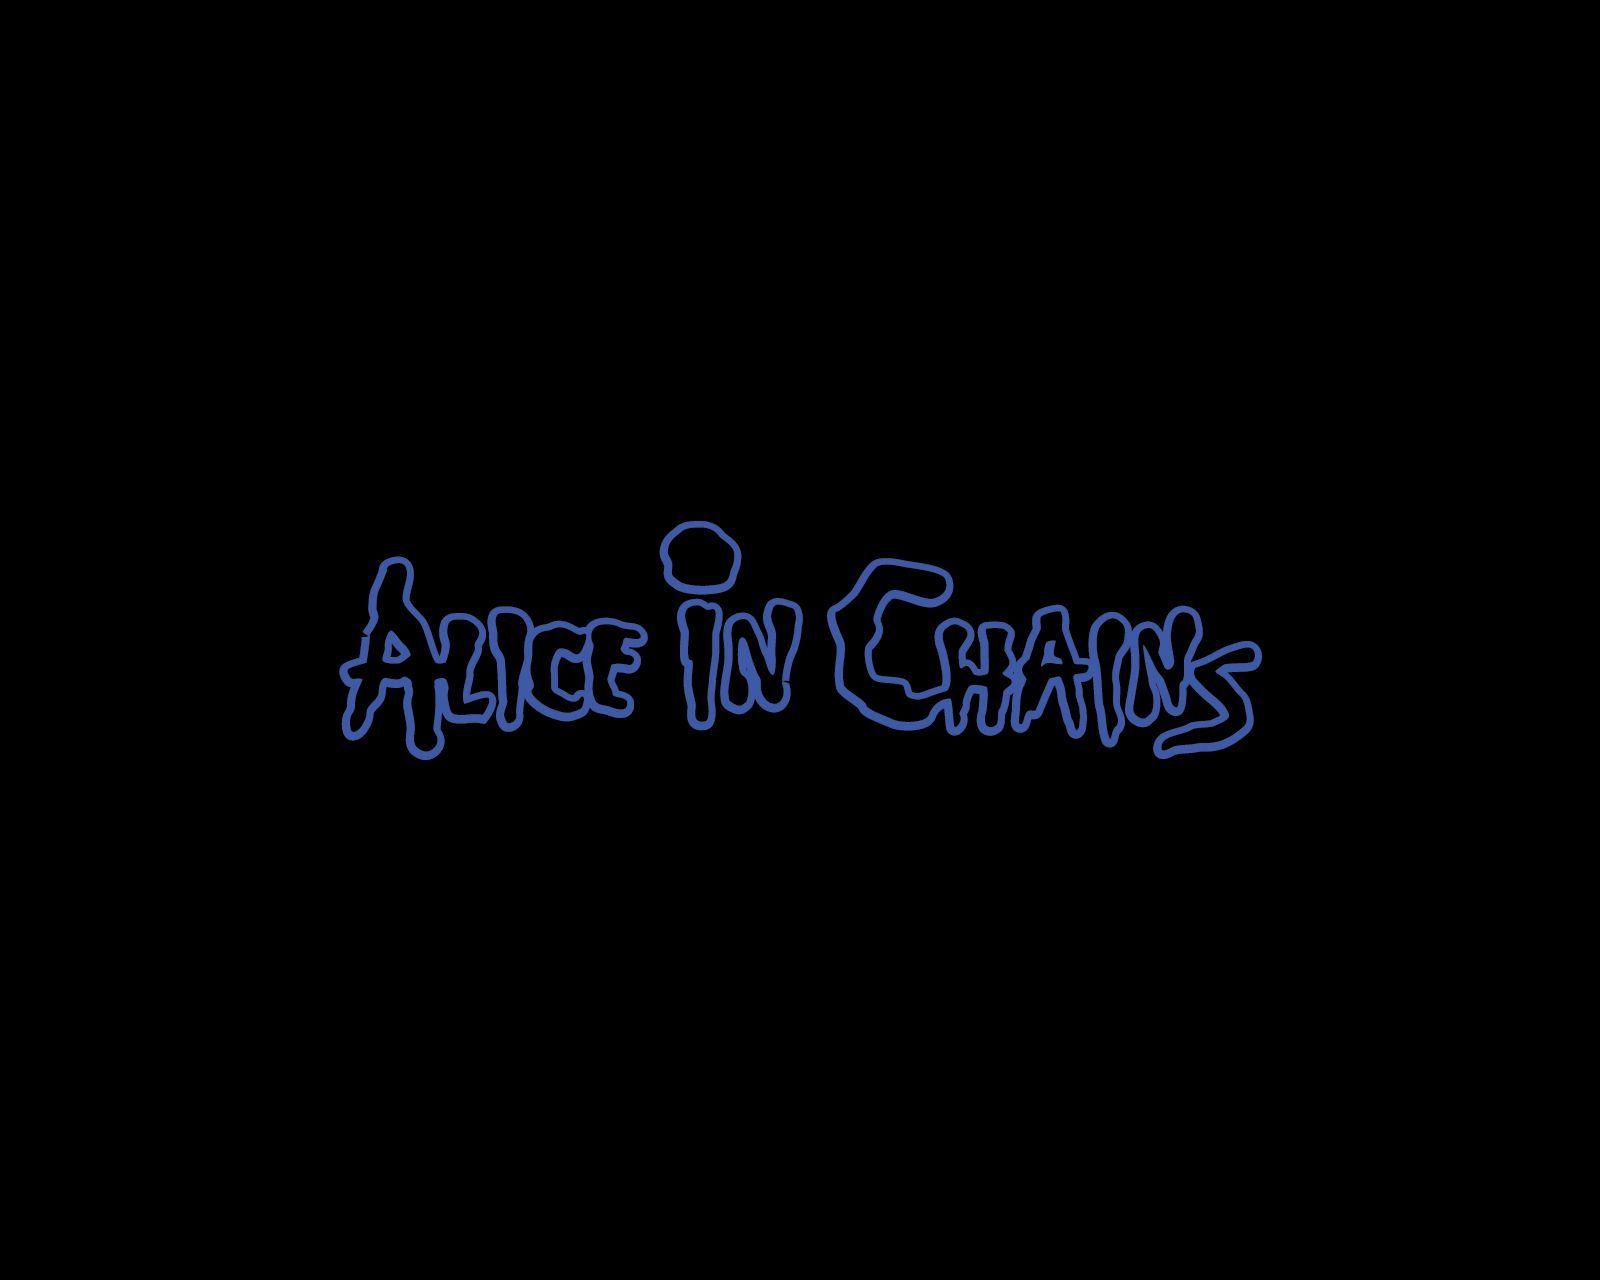 Alice In Chains logo wallpapers